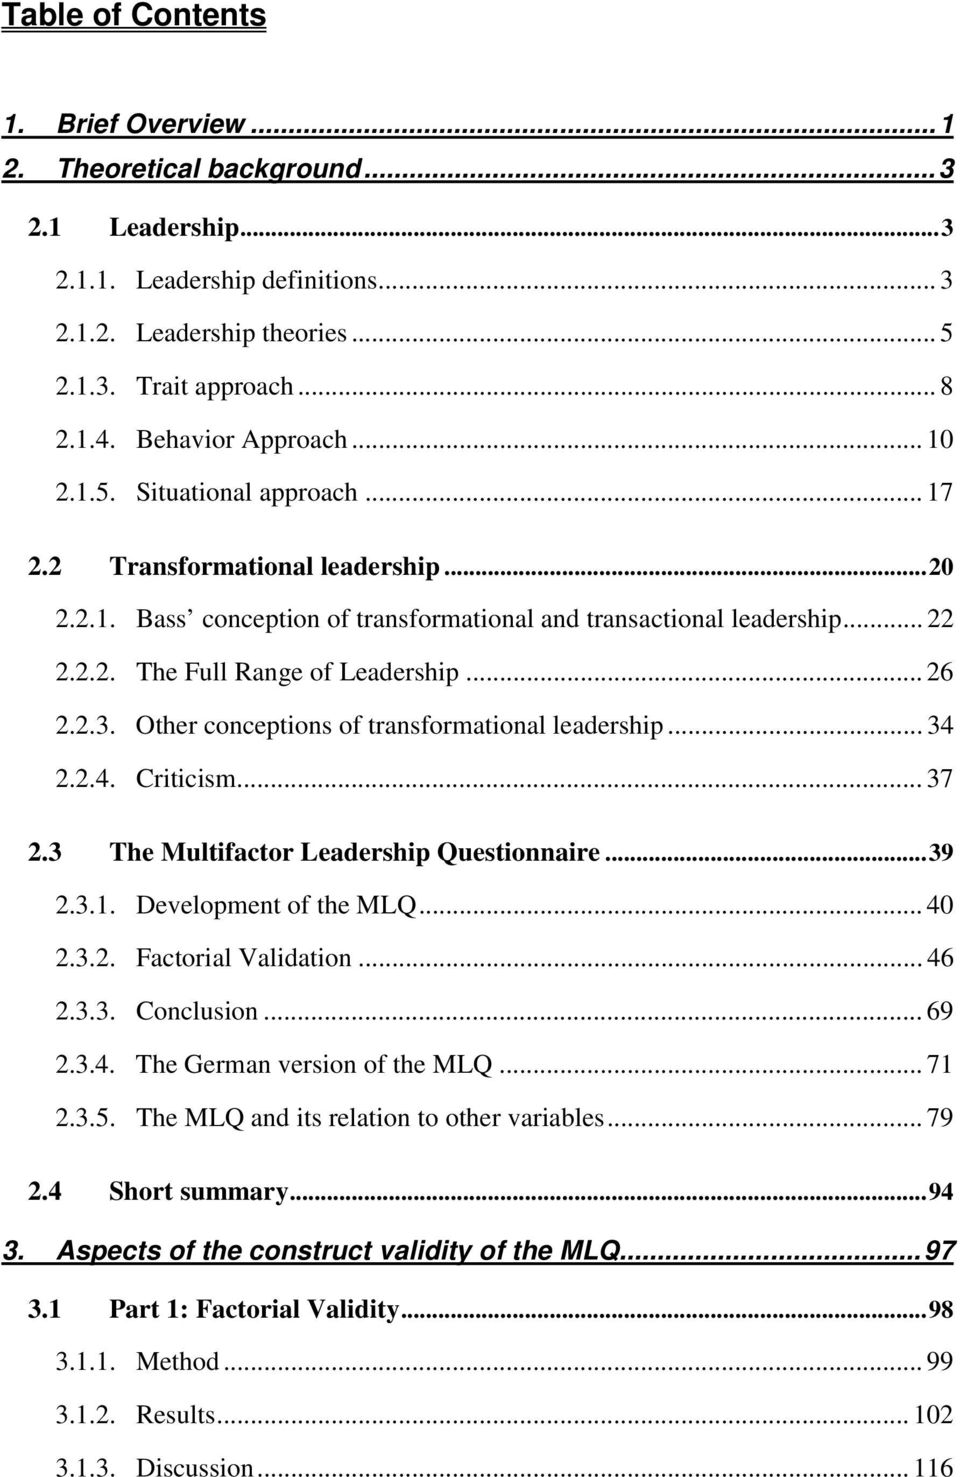 .. 26 2.2.3. Other conceptions of transformational leadership... 34 2.2.4. Criticism... 37 2.3 The Multifactor Leadership Questionnaire...39 2.3.1. Development of the MLQ... 40 2.3.2. Factorial Validation.